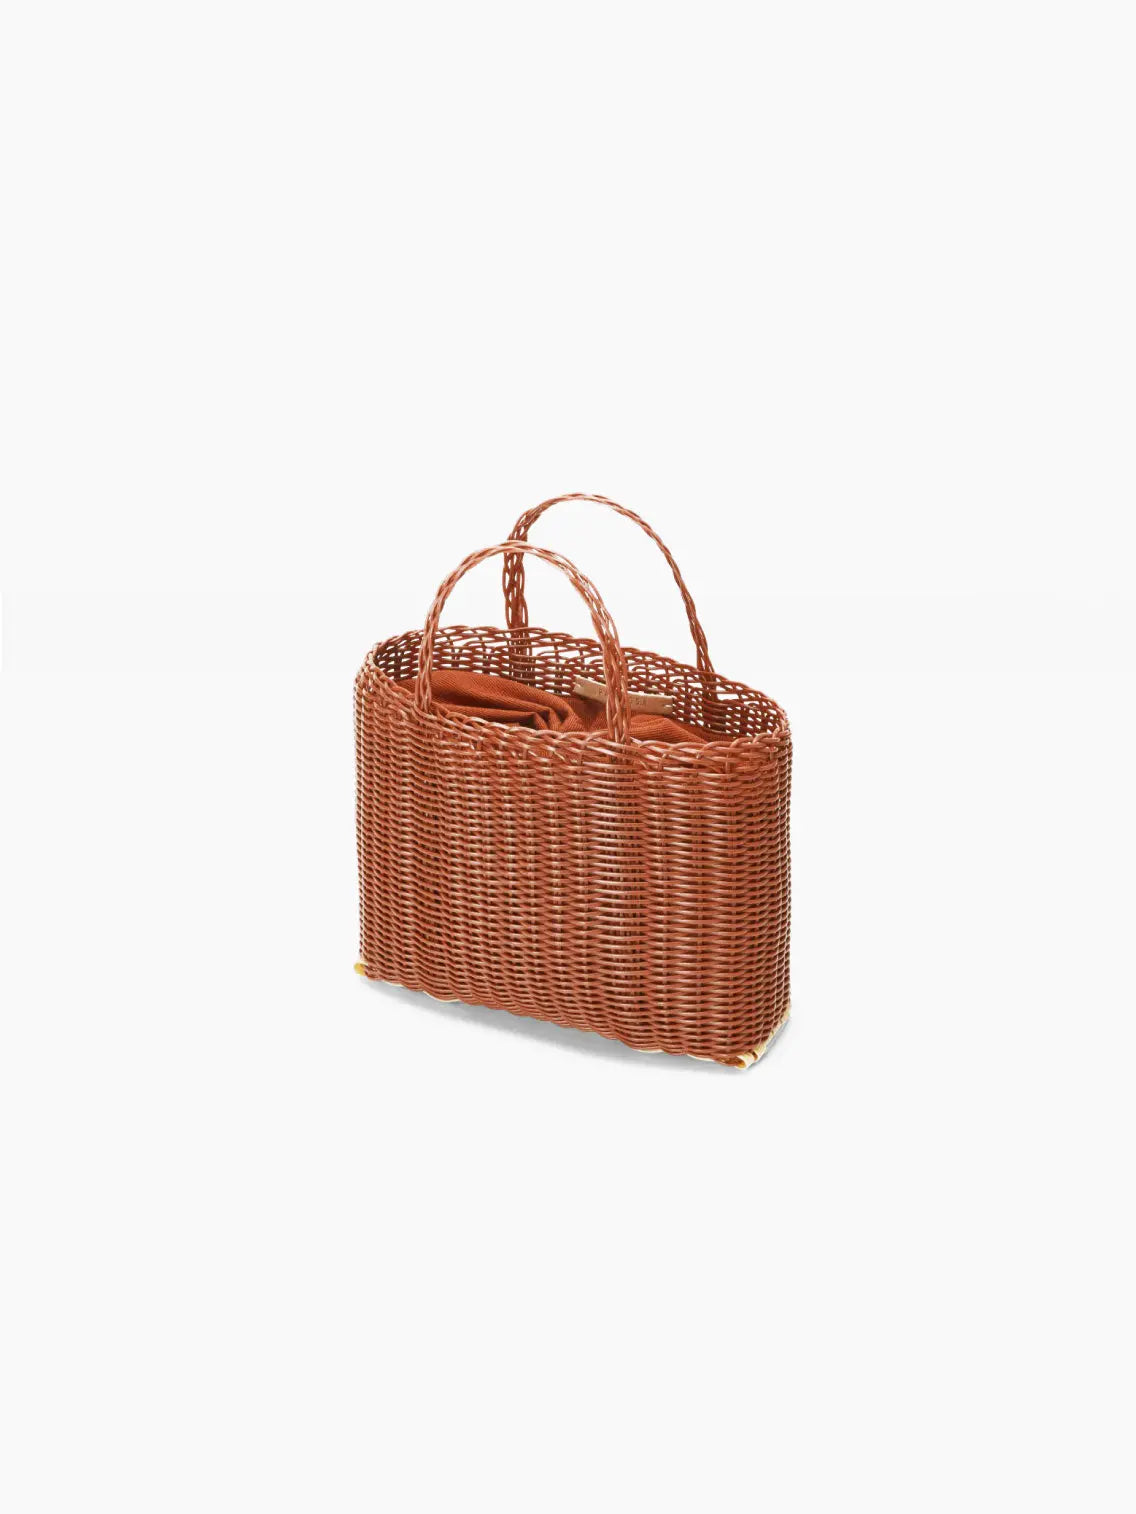 A rectangular, woven rattan handbag with a warm brown color is shown against a white background. It features a single loop handle on top, made of the same material. This chic accessory from Palorosa seamlessly blends style with functionality, perfect for any outing in Barcelona.